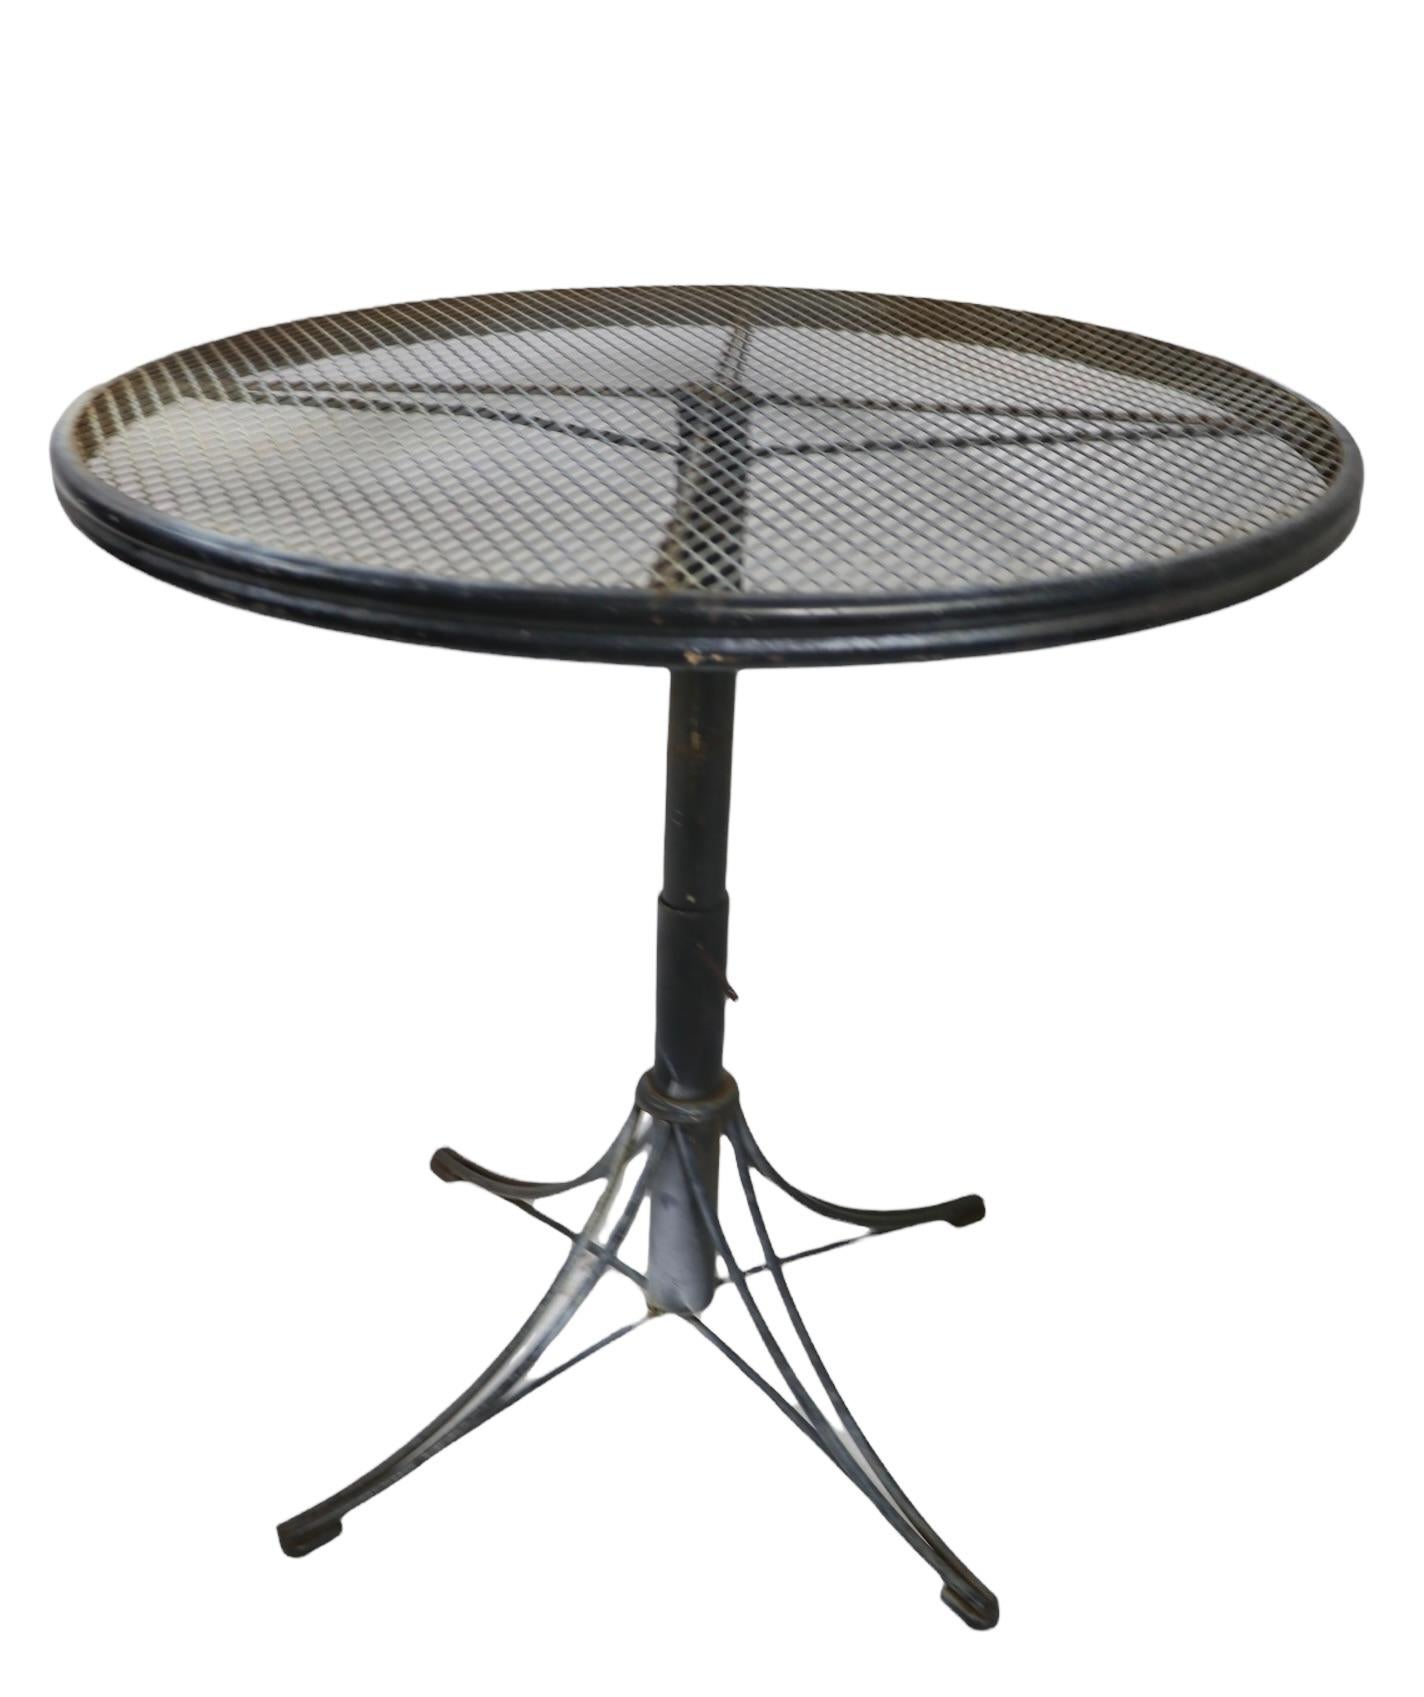 20th Century Adjustable Garden Patio Poolside Cafe Dining  Coffee Cocktail Table Homecrest For Sale